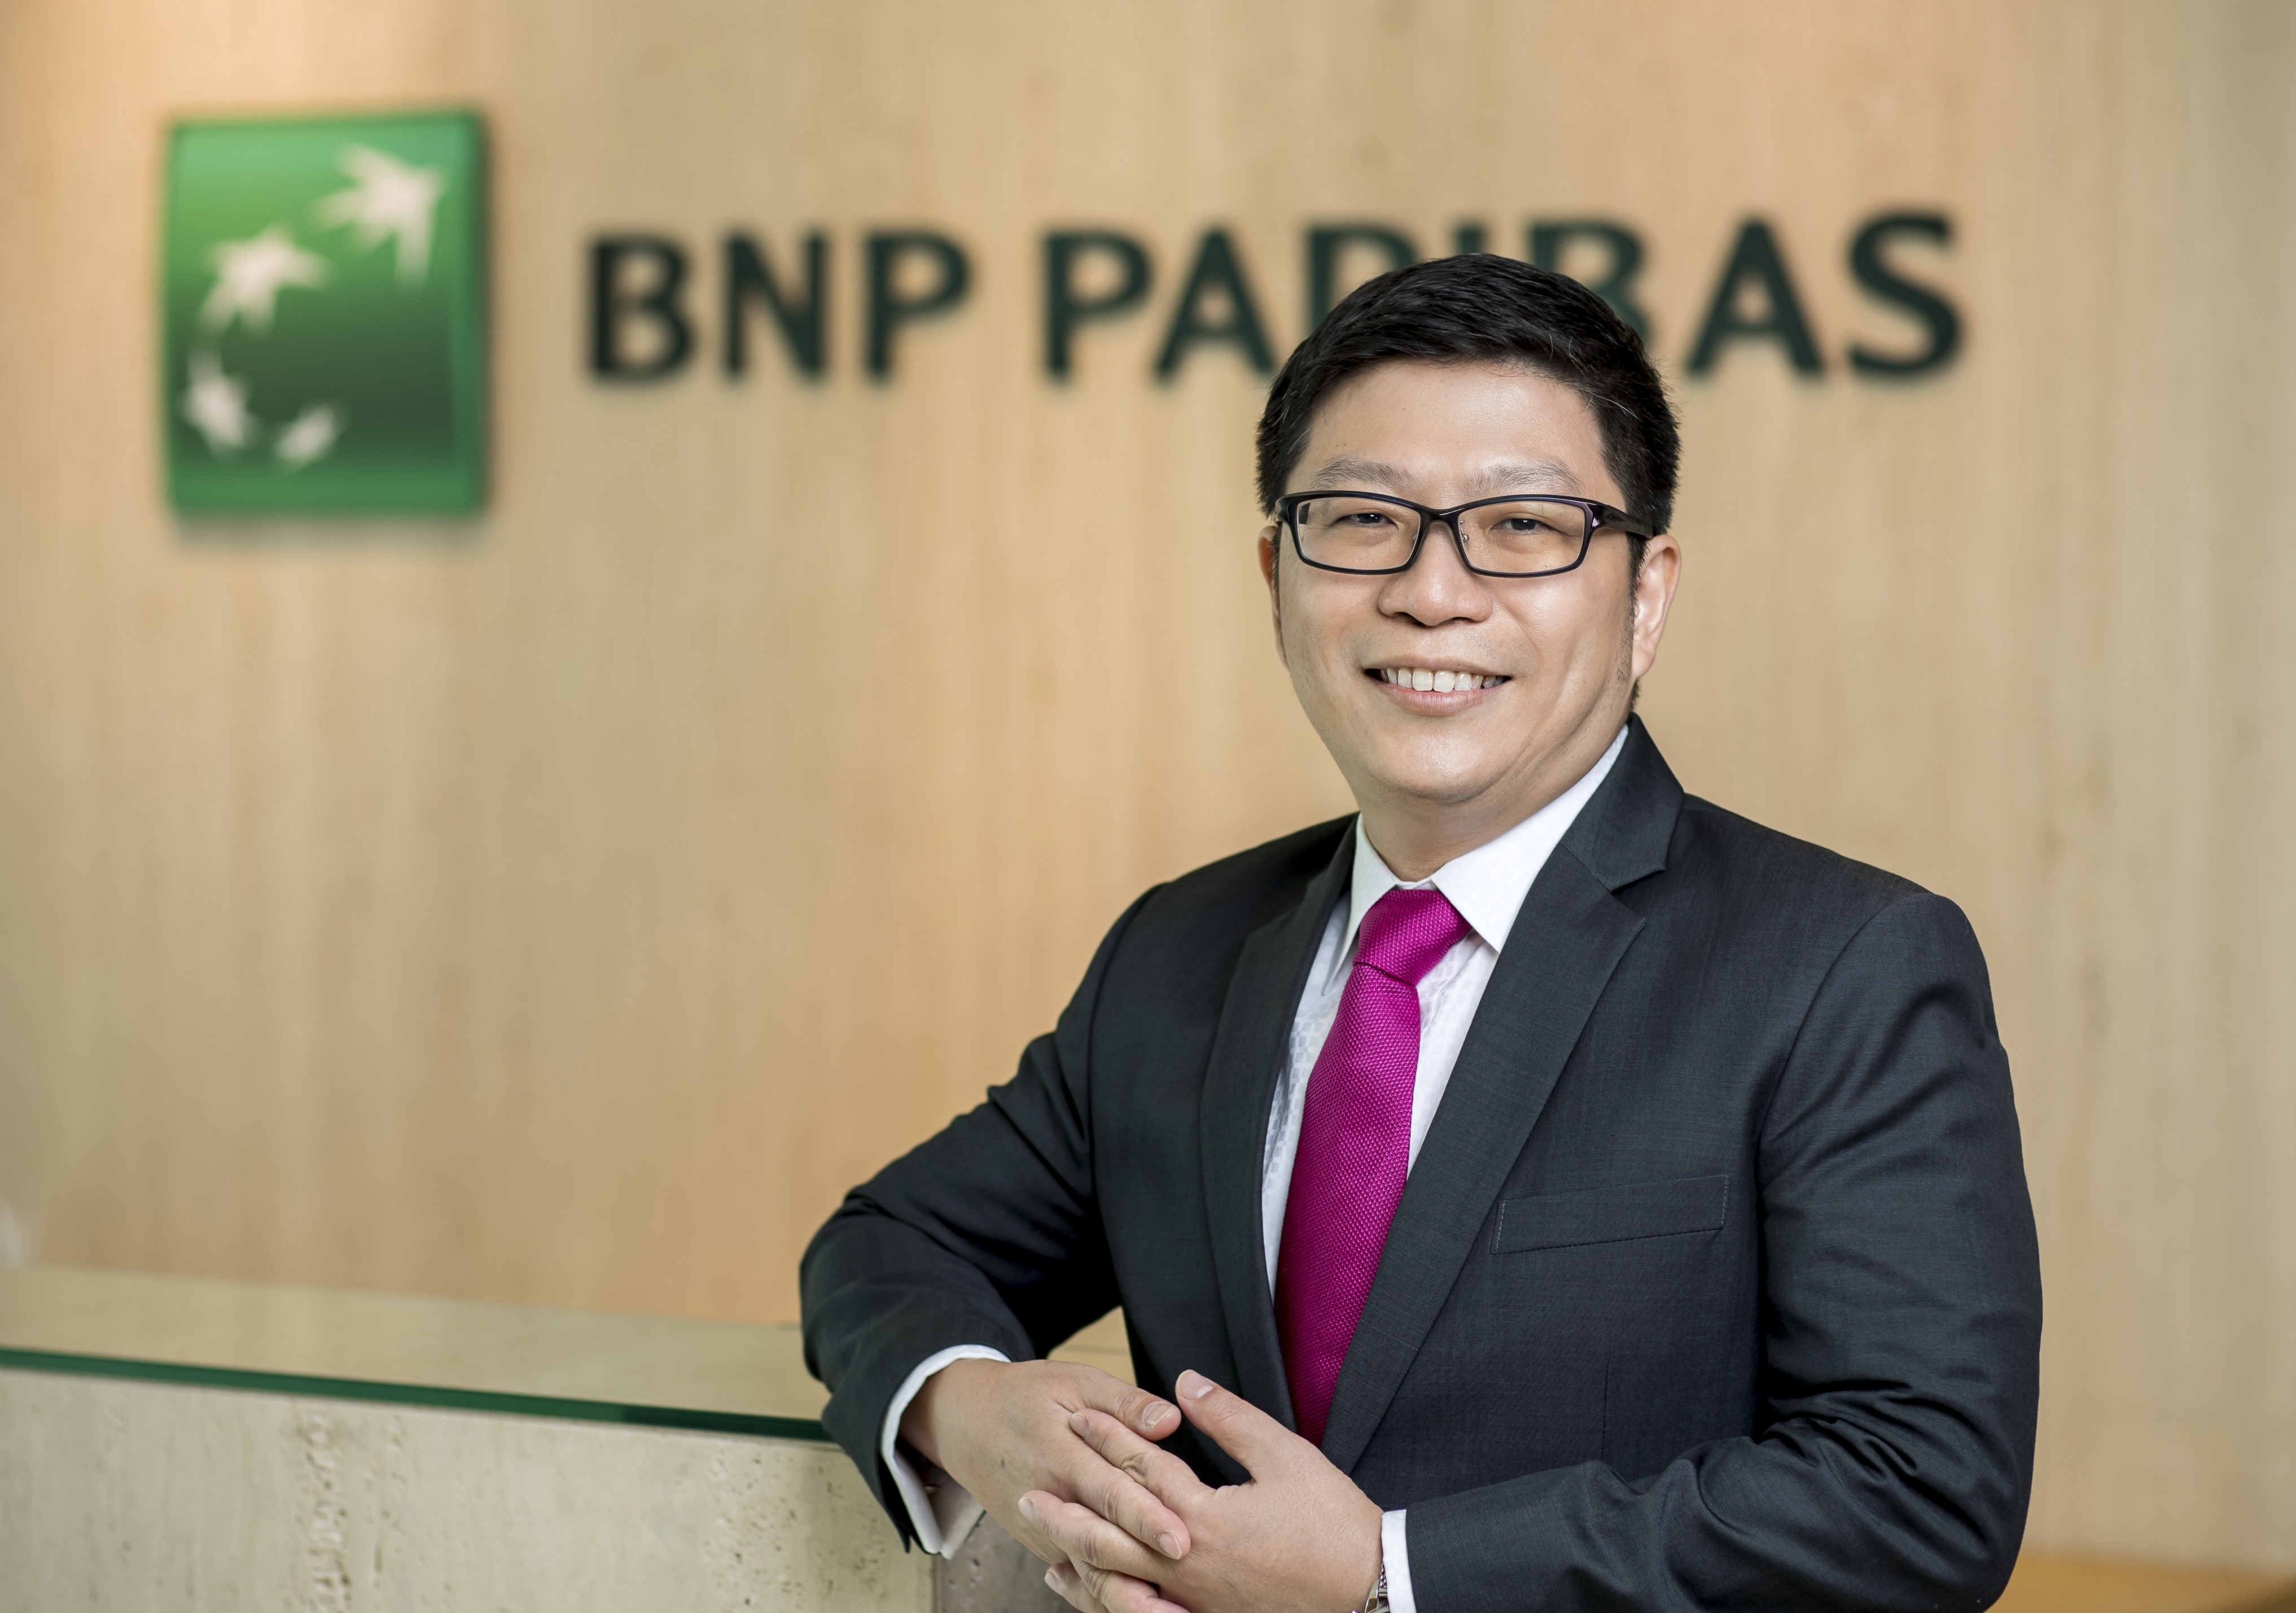 Edwin Chan, Head of Transaction Banking Products, Asia Pacific, BNP Paribas.